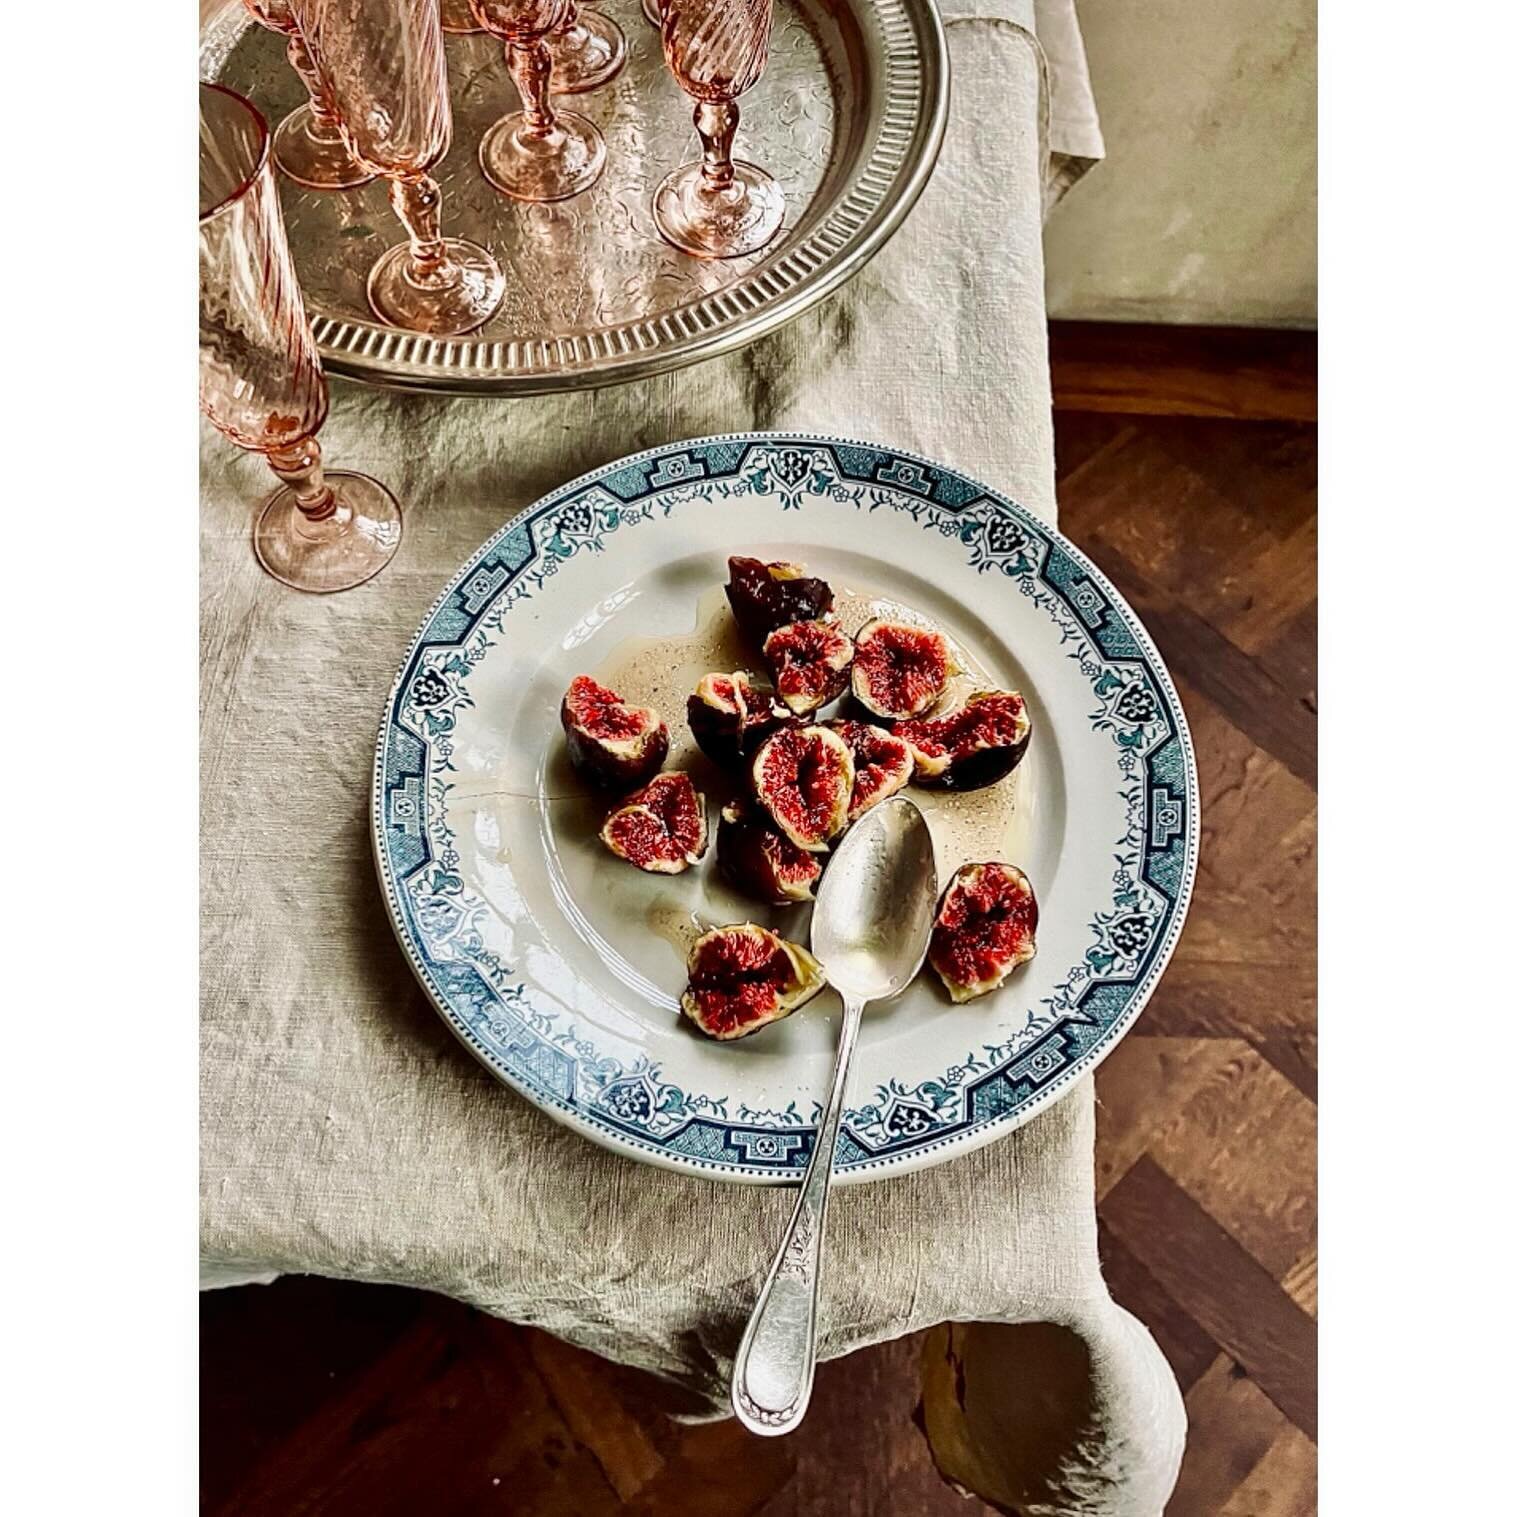 Gregor&rsquo;s figs and honey. ❤️
@gregorsalade 
@chateaugudanes Autumn 2023.
.
.
.
.
.
#chateaugudanes #figs #honey #bees #organic #france #ariege #midipyrennes #beautifuldestinations #beautifulcuisines #cuisinefrancaise #theartofslowliving #foodpho